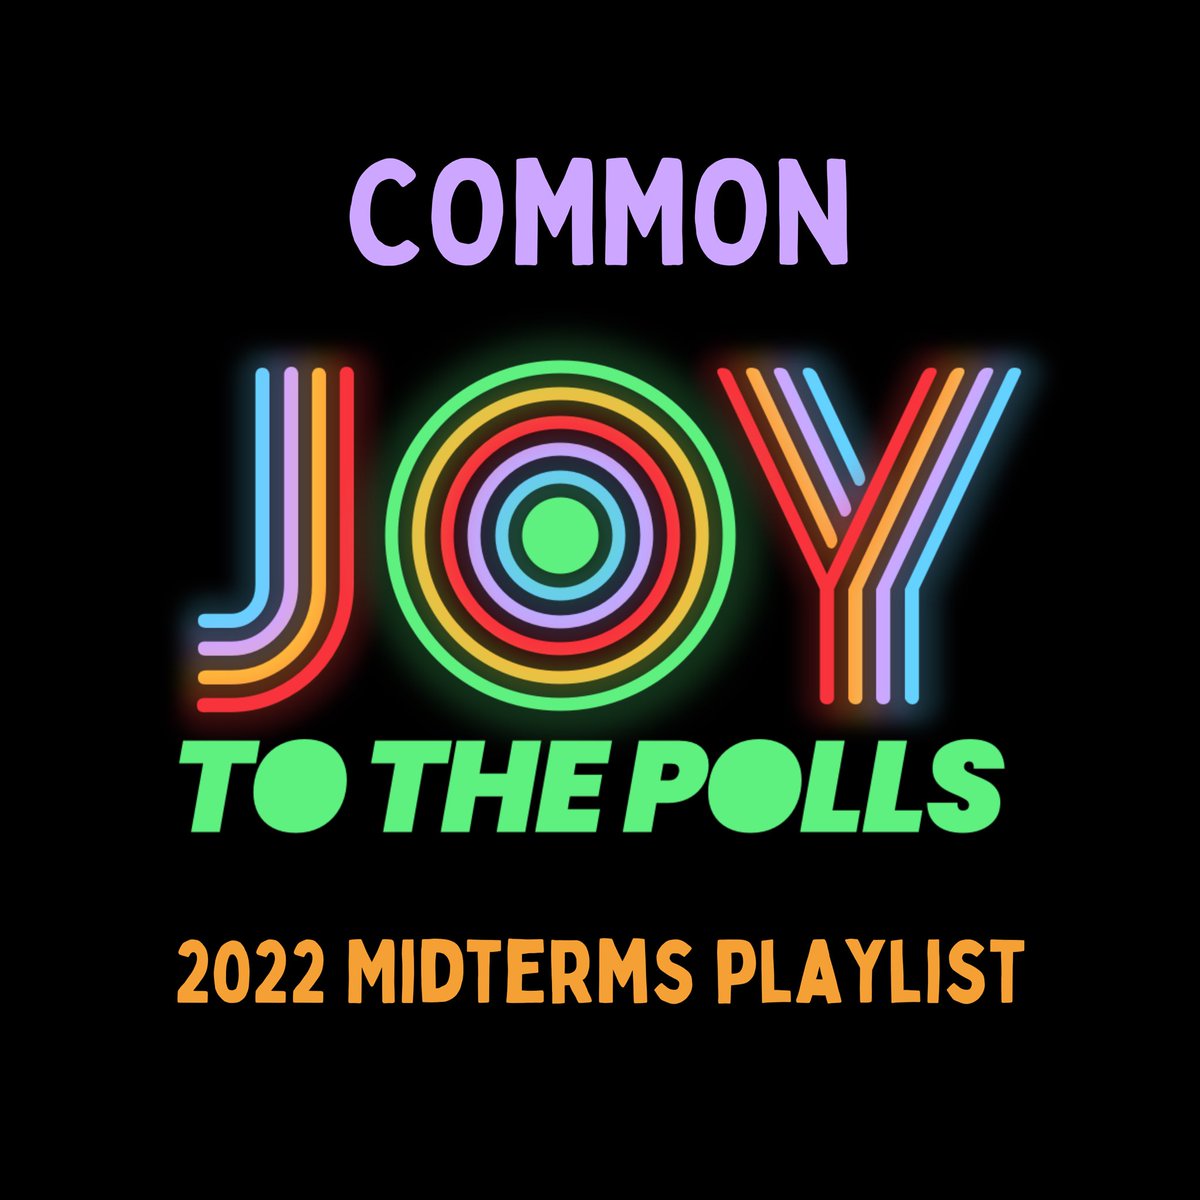 1 week away from Election Day! If your state is eligible for early voting, get out and vote today. While you're waiting in line or doing your research, listen to my @JoyToThePolls playlist to get fired up about voting: spoti.fi/3DRasUB